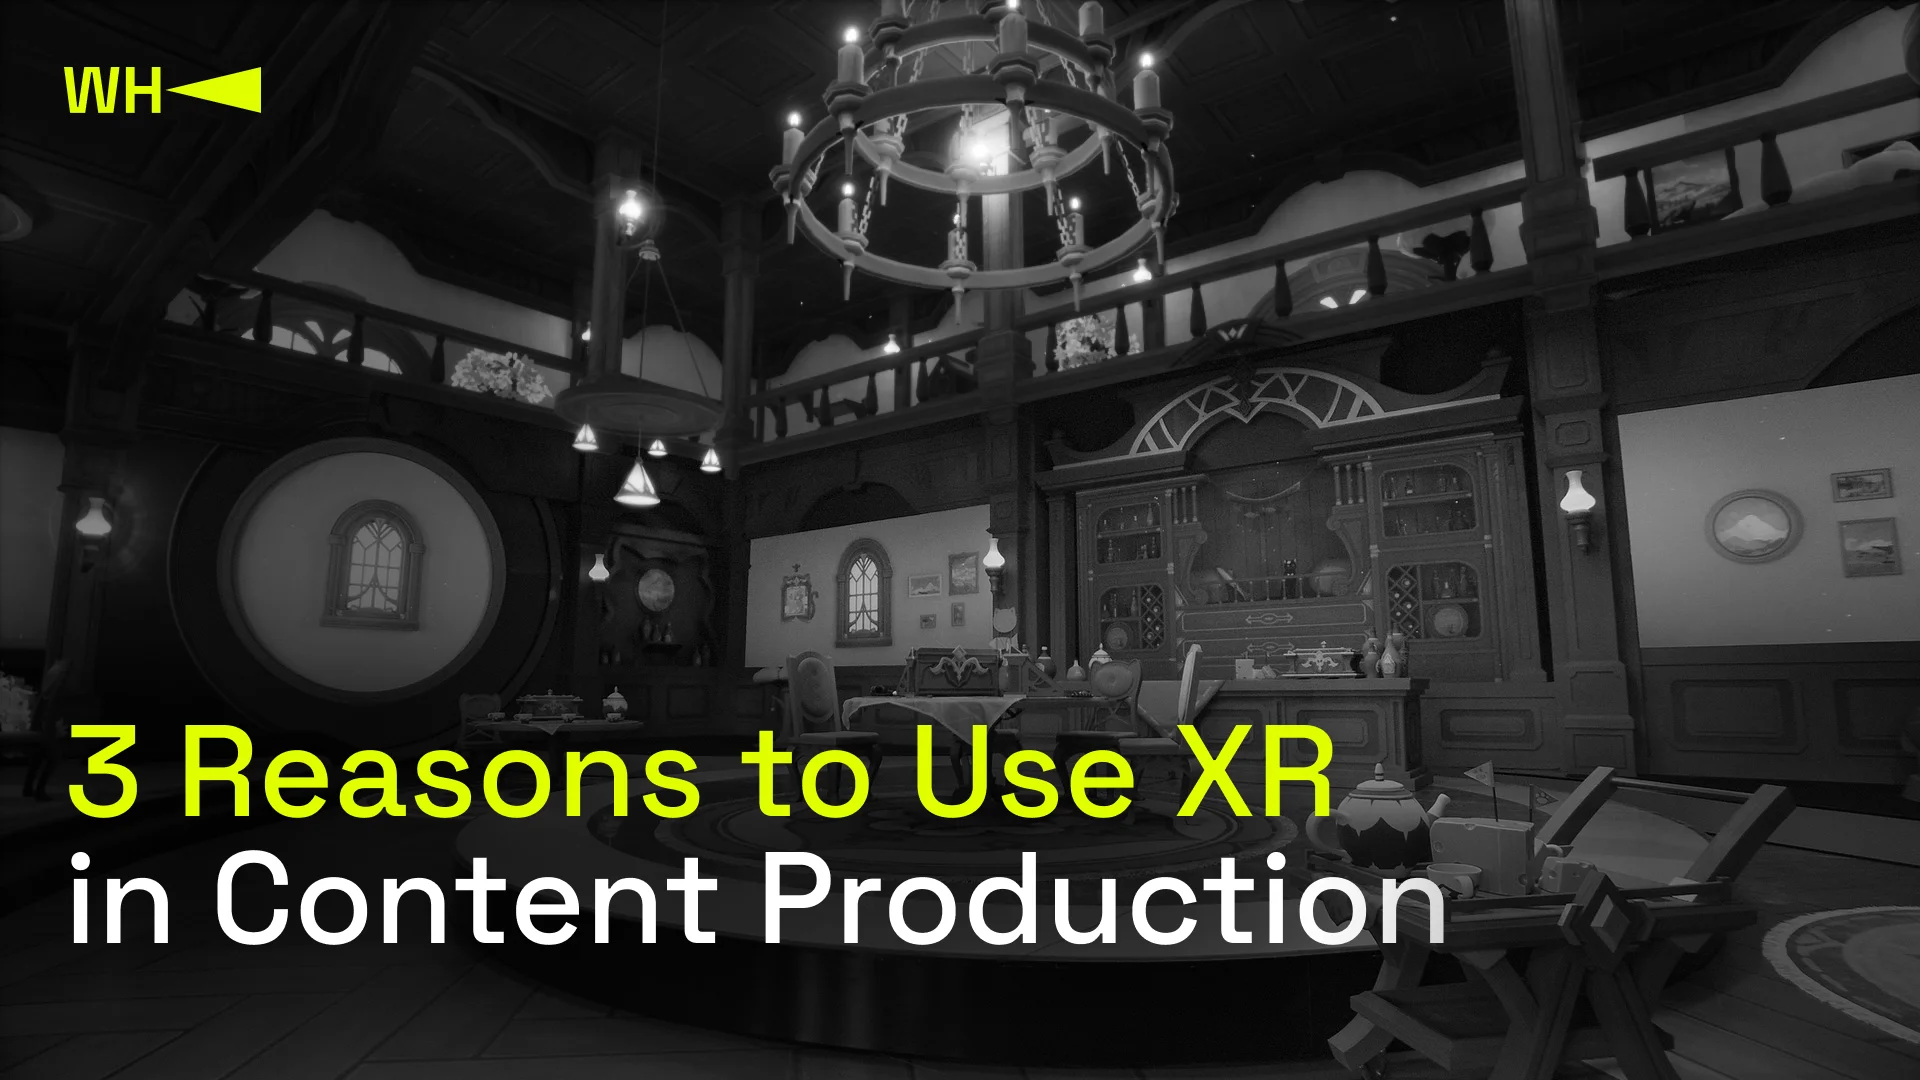 Three Reasons to Use XR in Content Production